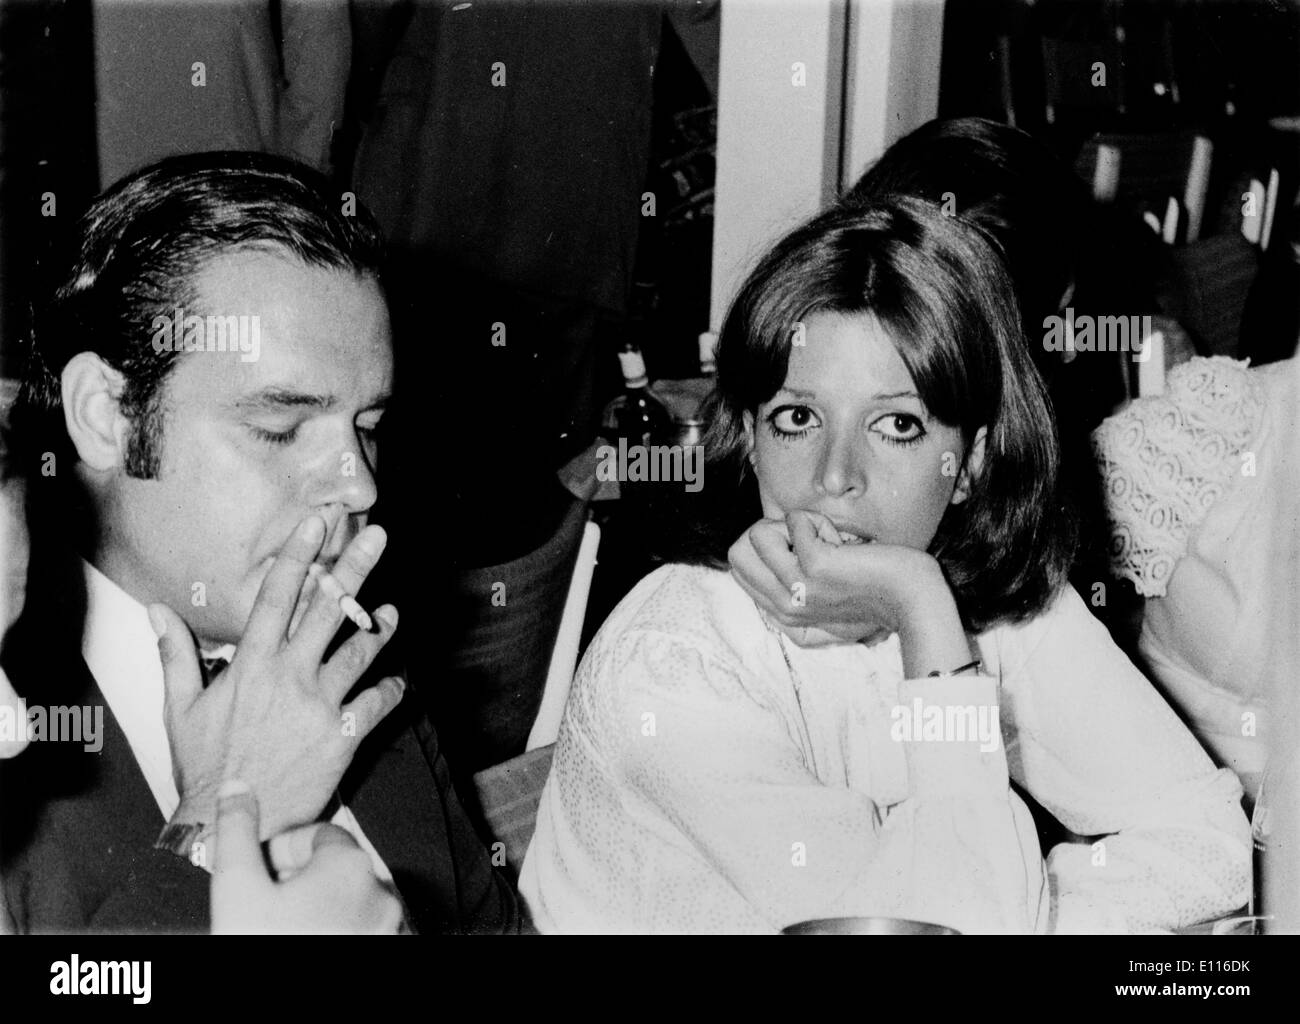 Feb 19, 1976; Athens, Greece; CHRISTINA ONASSIS daughter of billionaire shipping magnate Aristotle Onassis and her husband ALEXANDER ANDREADIS, one of three sons of banker industrialist Prof. Stratis Andreadis of Athens. (Credit Image: KEYSTONE Pictures USA/ZUMAPRESS.com) Stock Photo